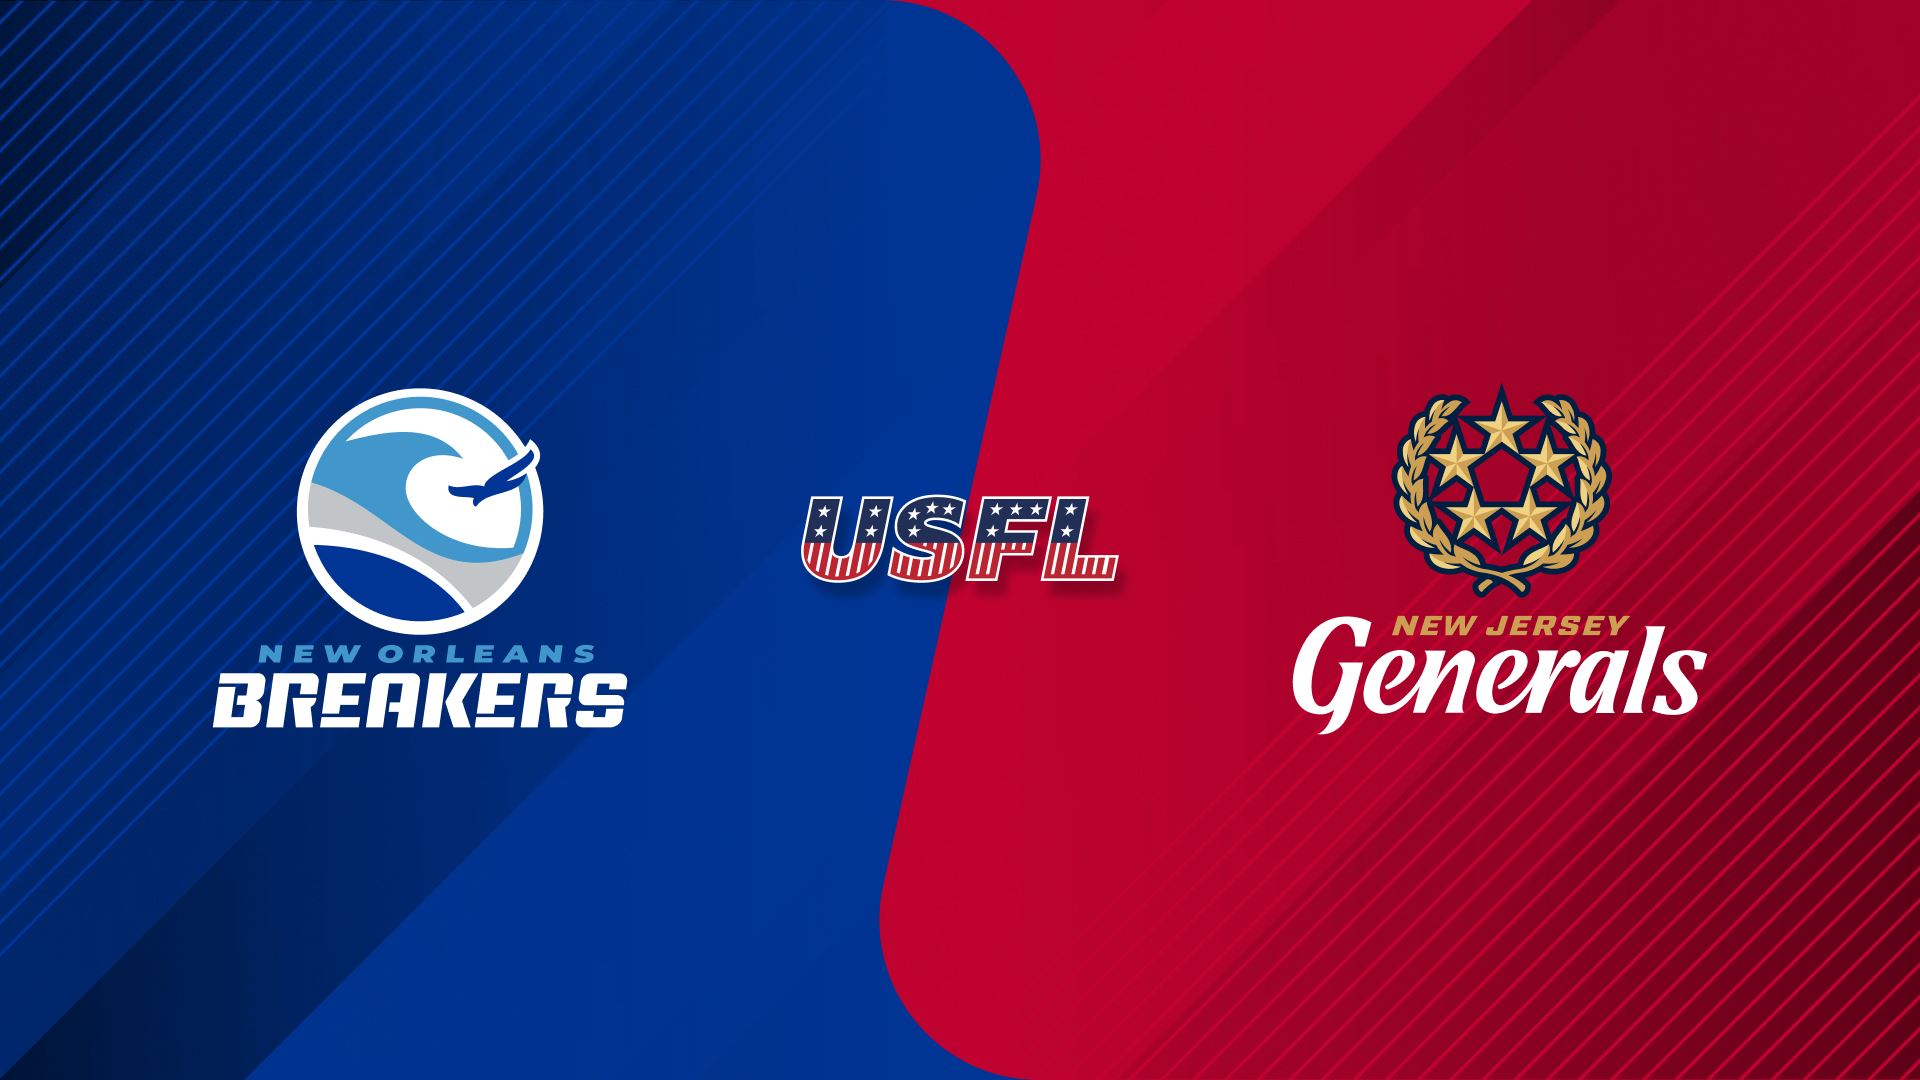 What to expect in New Orleans Breakers vs. New Jersey Generals